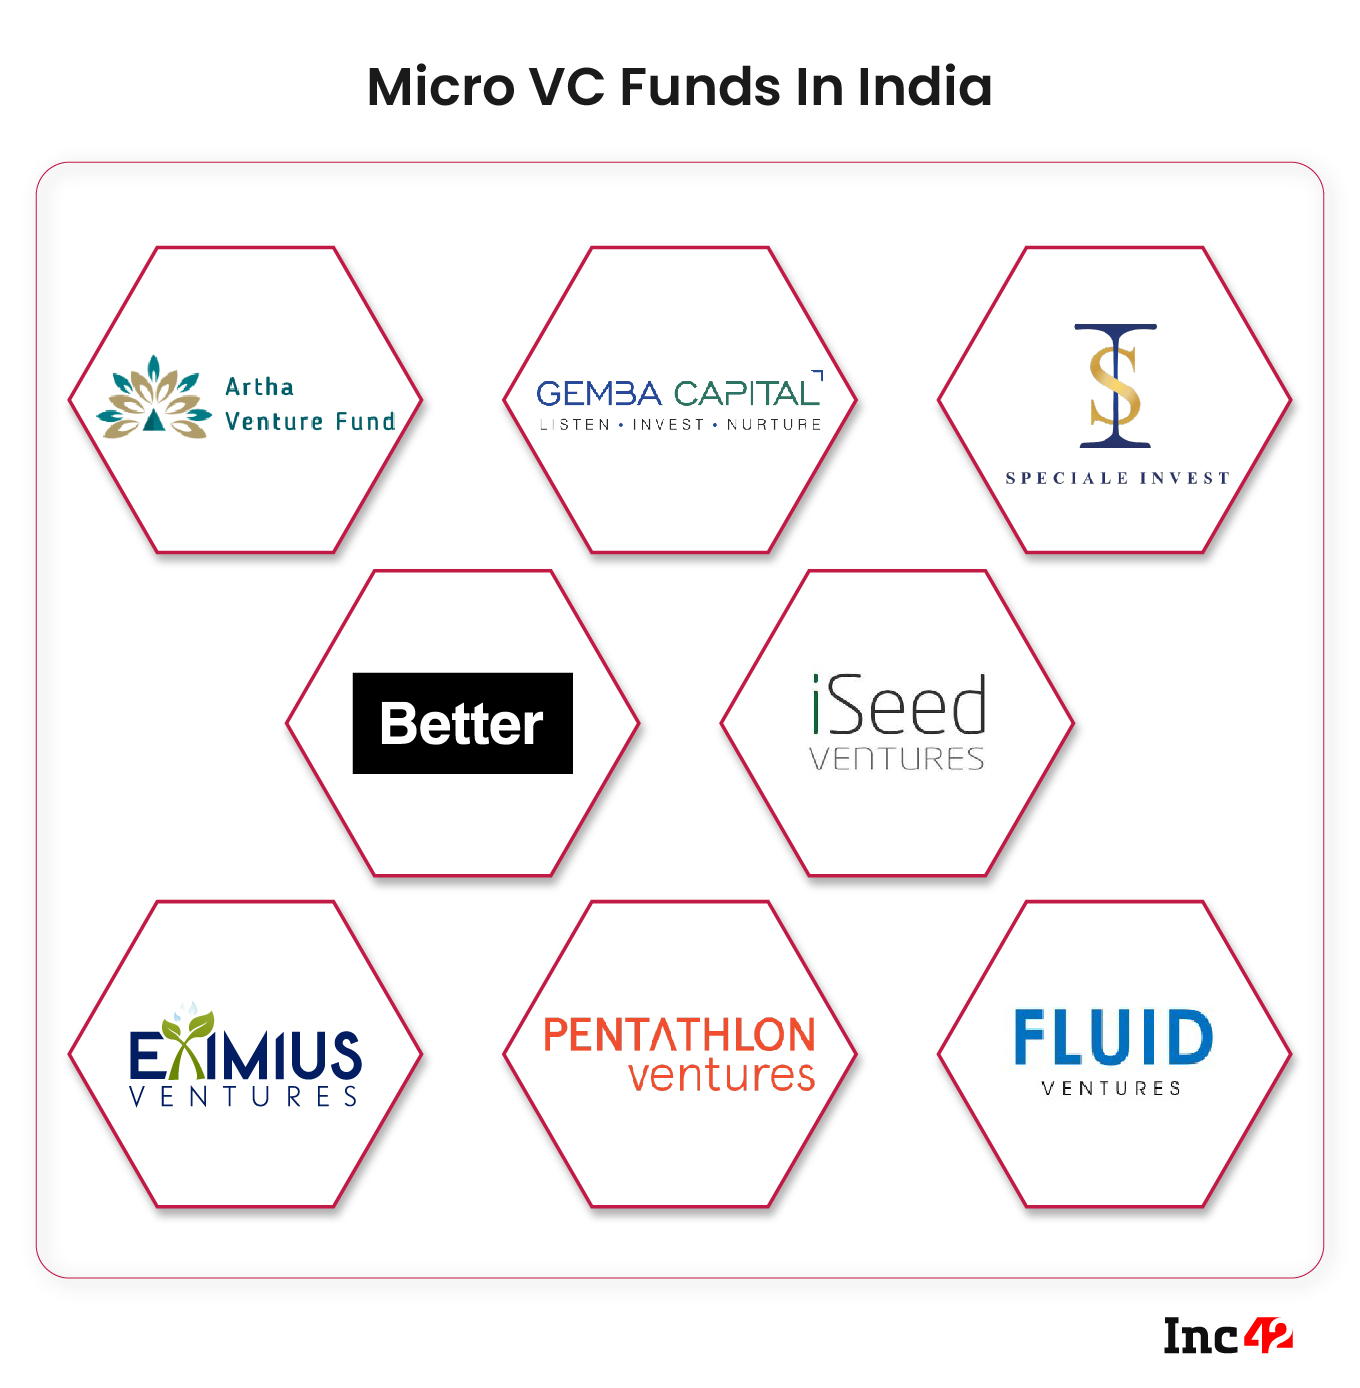 List of Micro VC Funds In India